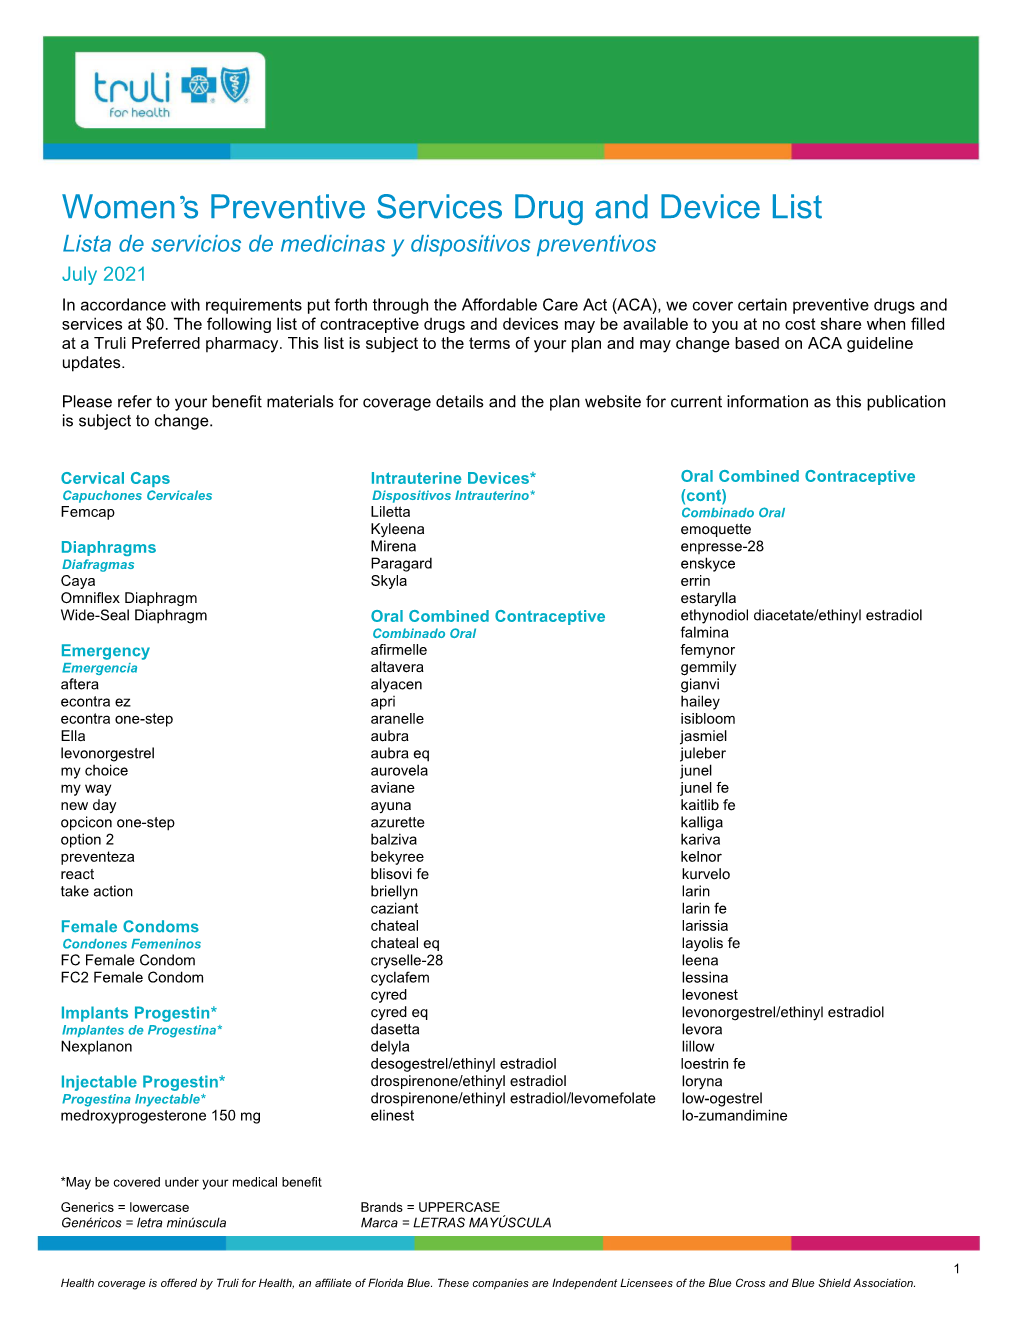 Women's Preventive Services Drug and Device List